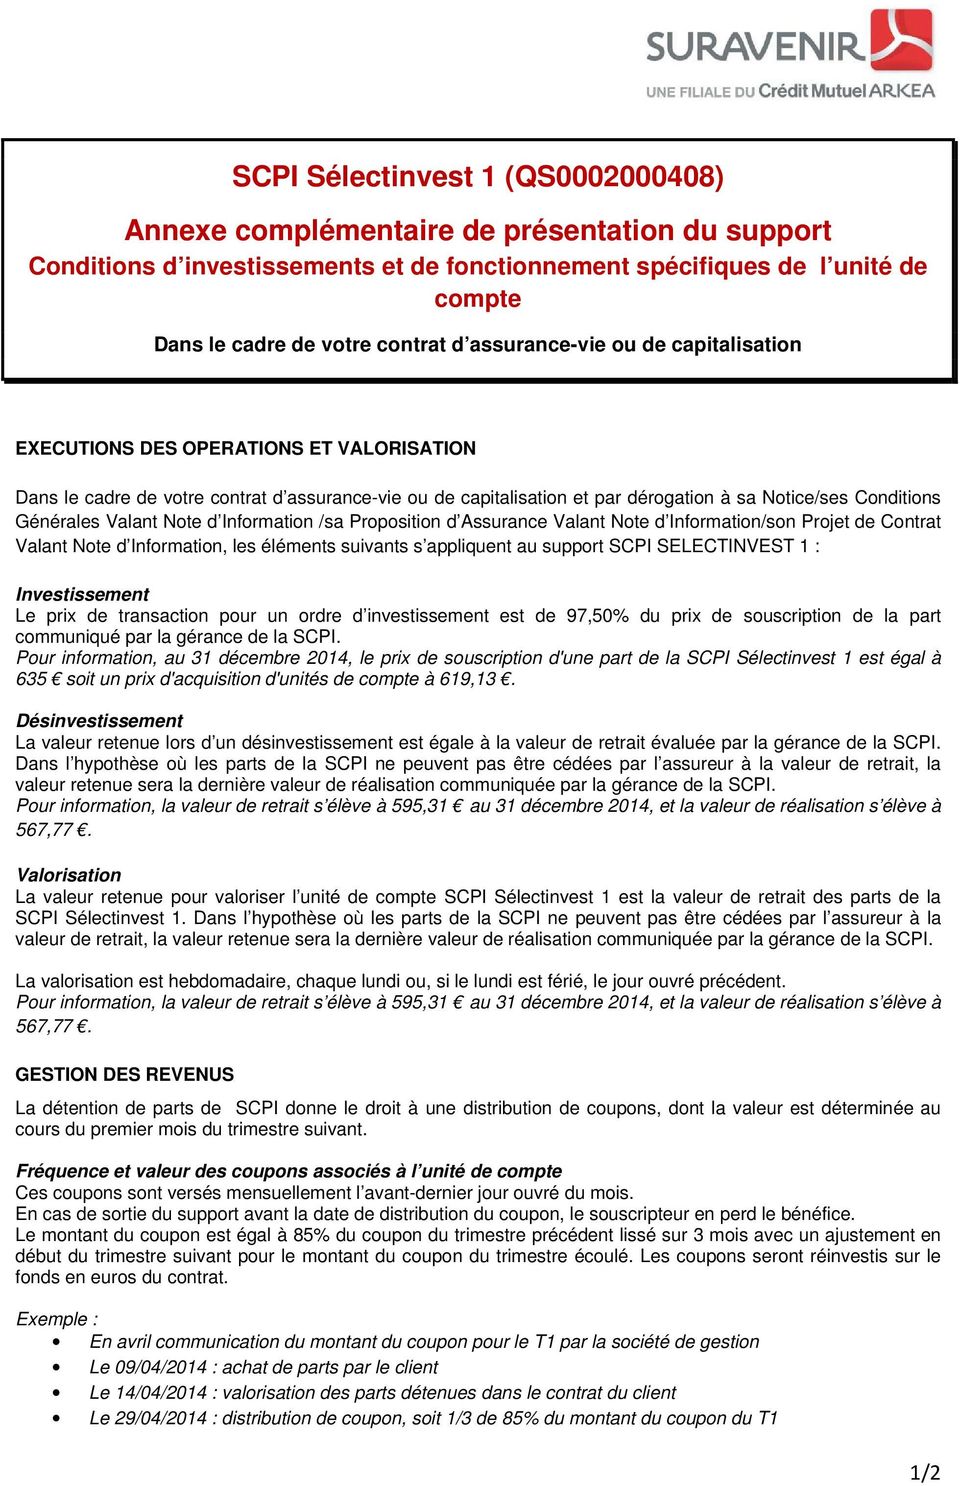 Valant Note d Information /sa Proposition d Assurance Valant Note d Information/son Projet de Contrat Valant Note d Information, les éléments suivants s appliquent au support SCPI SELECTINVEST 1 :